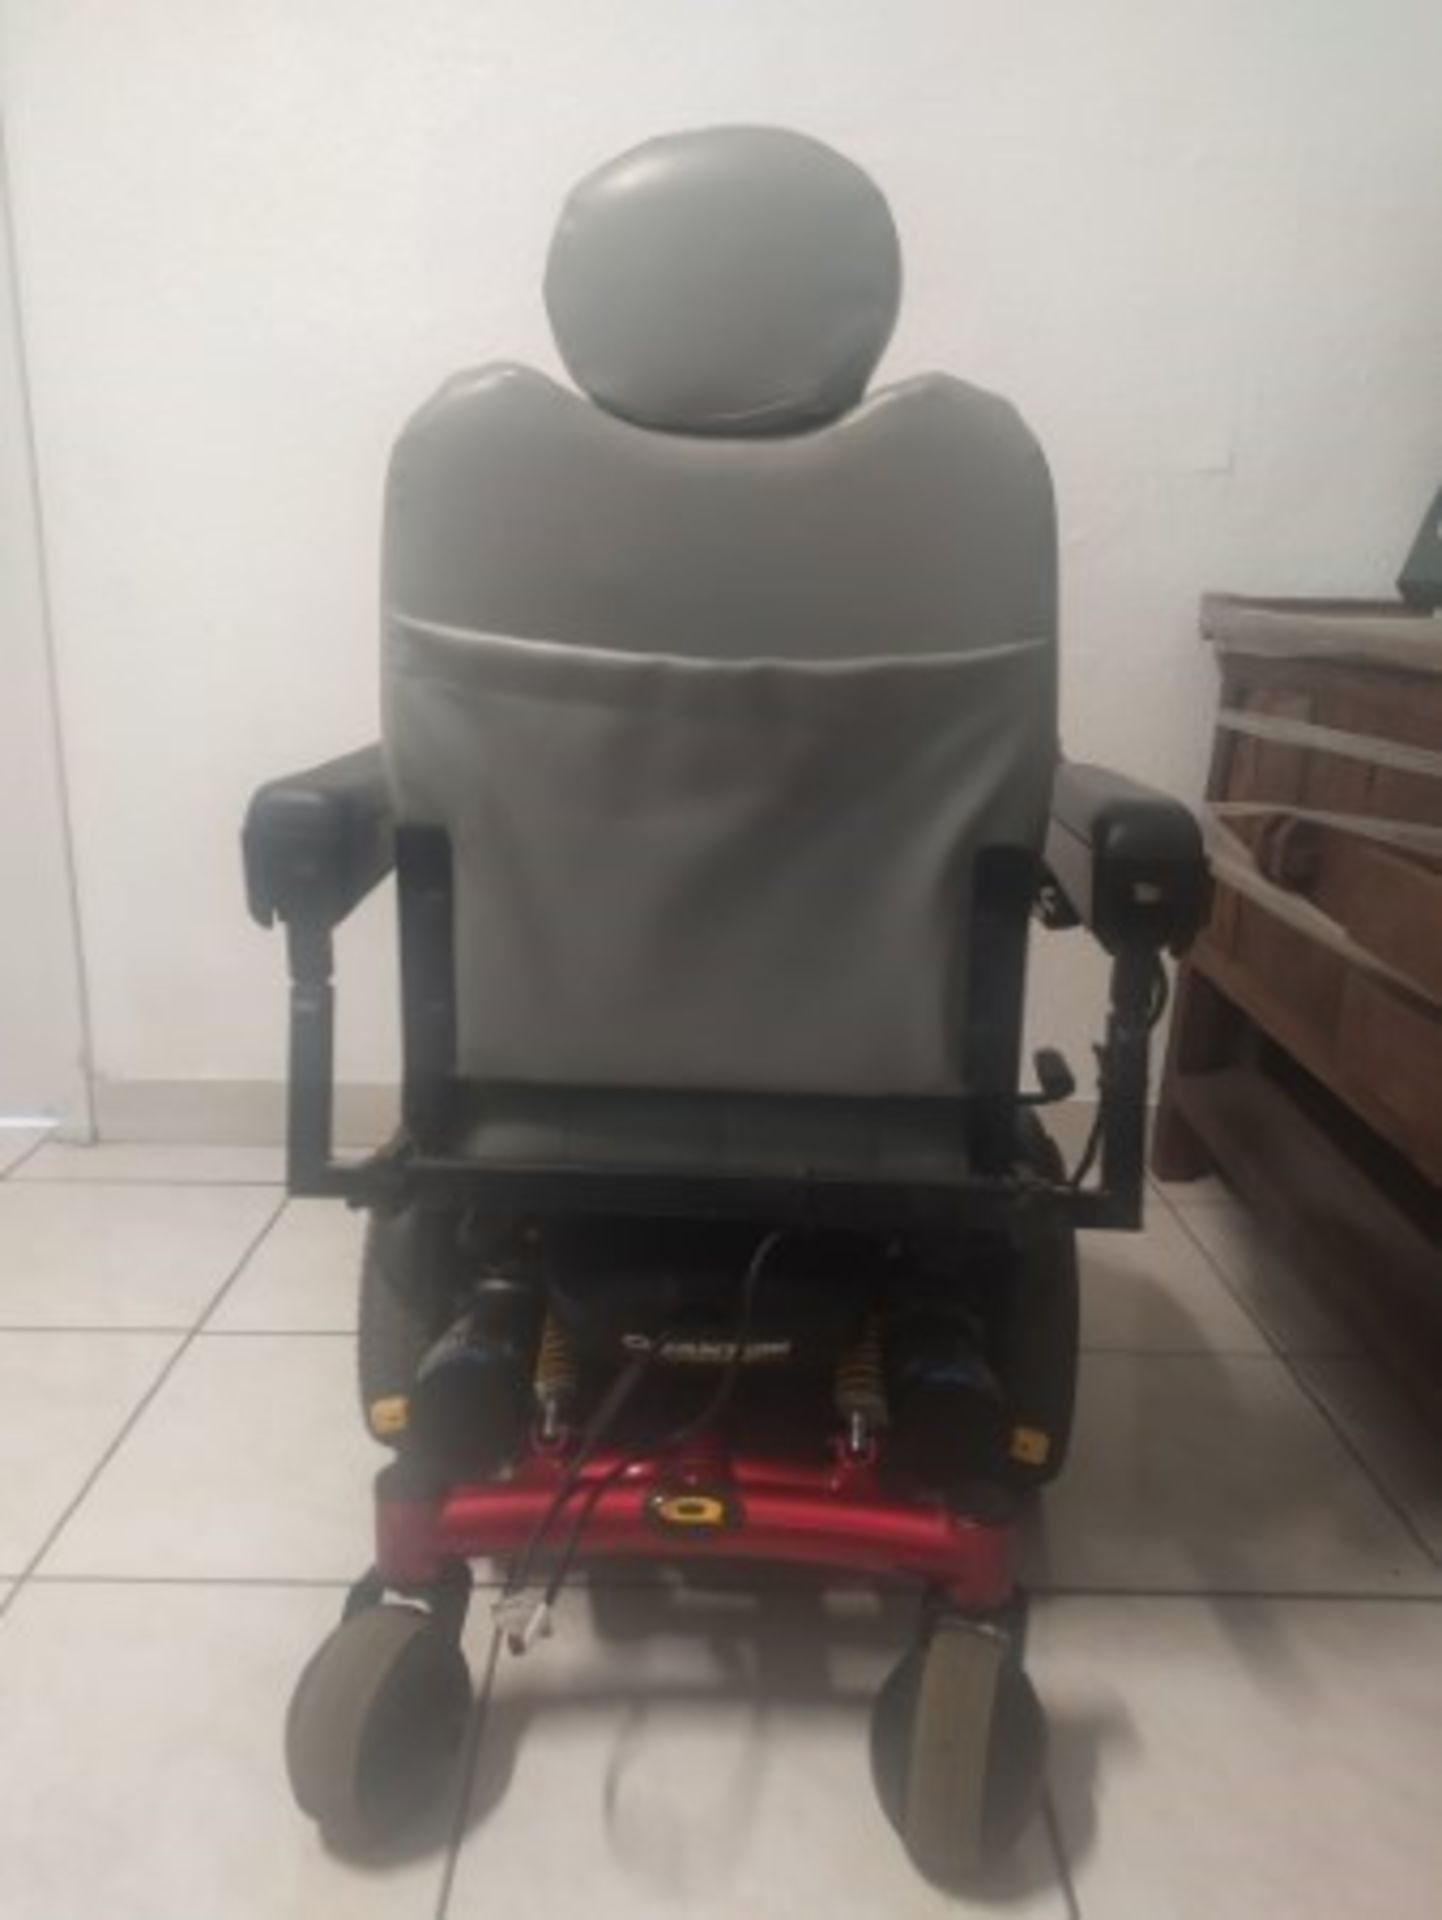 2013 QUANTUM 6000Z 6-WHEEL POWER CHAIR WITH JOYSTICK CONTROL - RED - 300LB CAPACITY - SERIAL No. 231 - Image 3 of 4